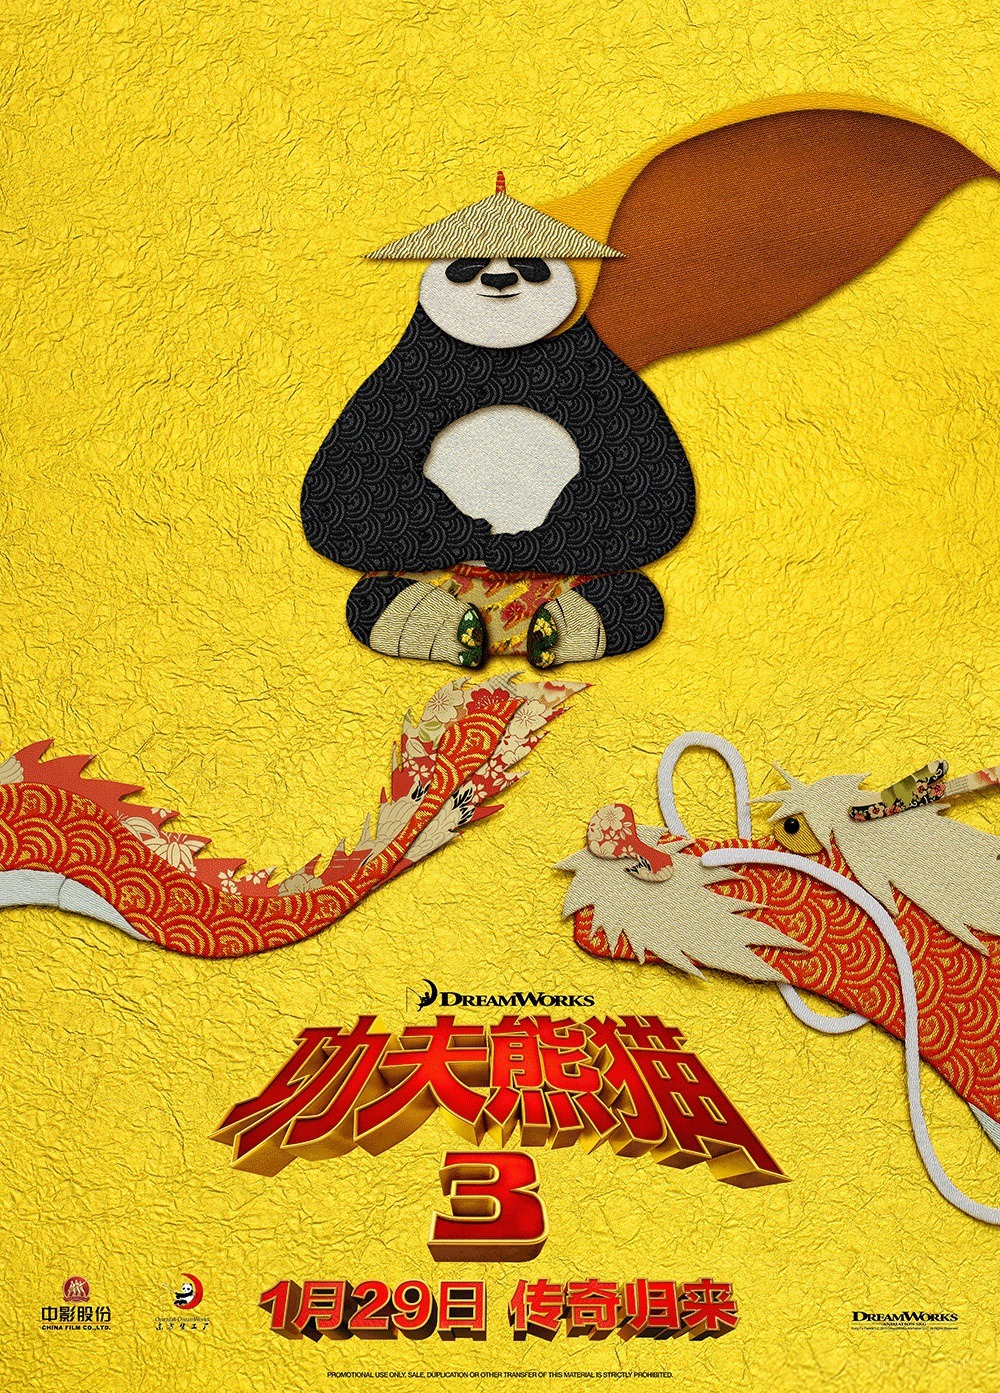 Extra Large Movie Poster Image for Kung Fu Panda 3 (#15 of 22)